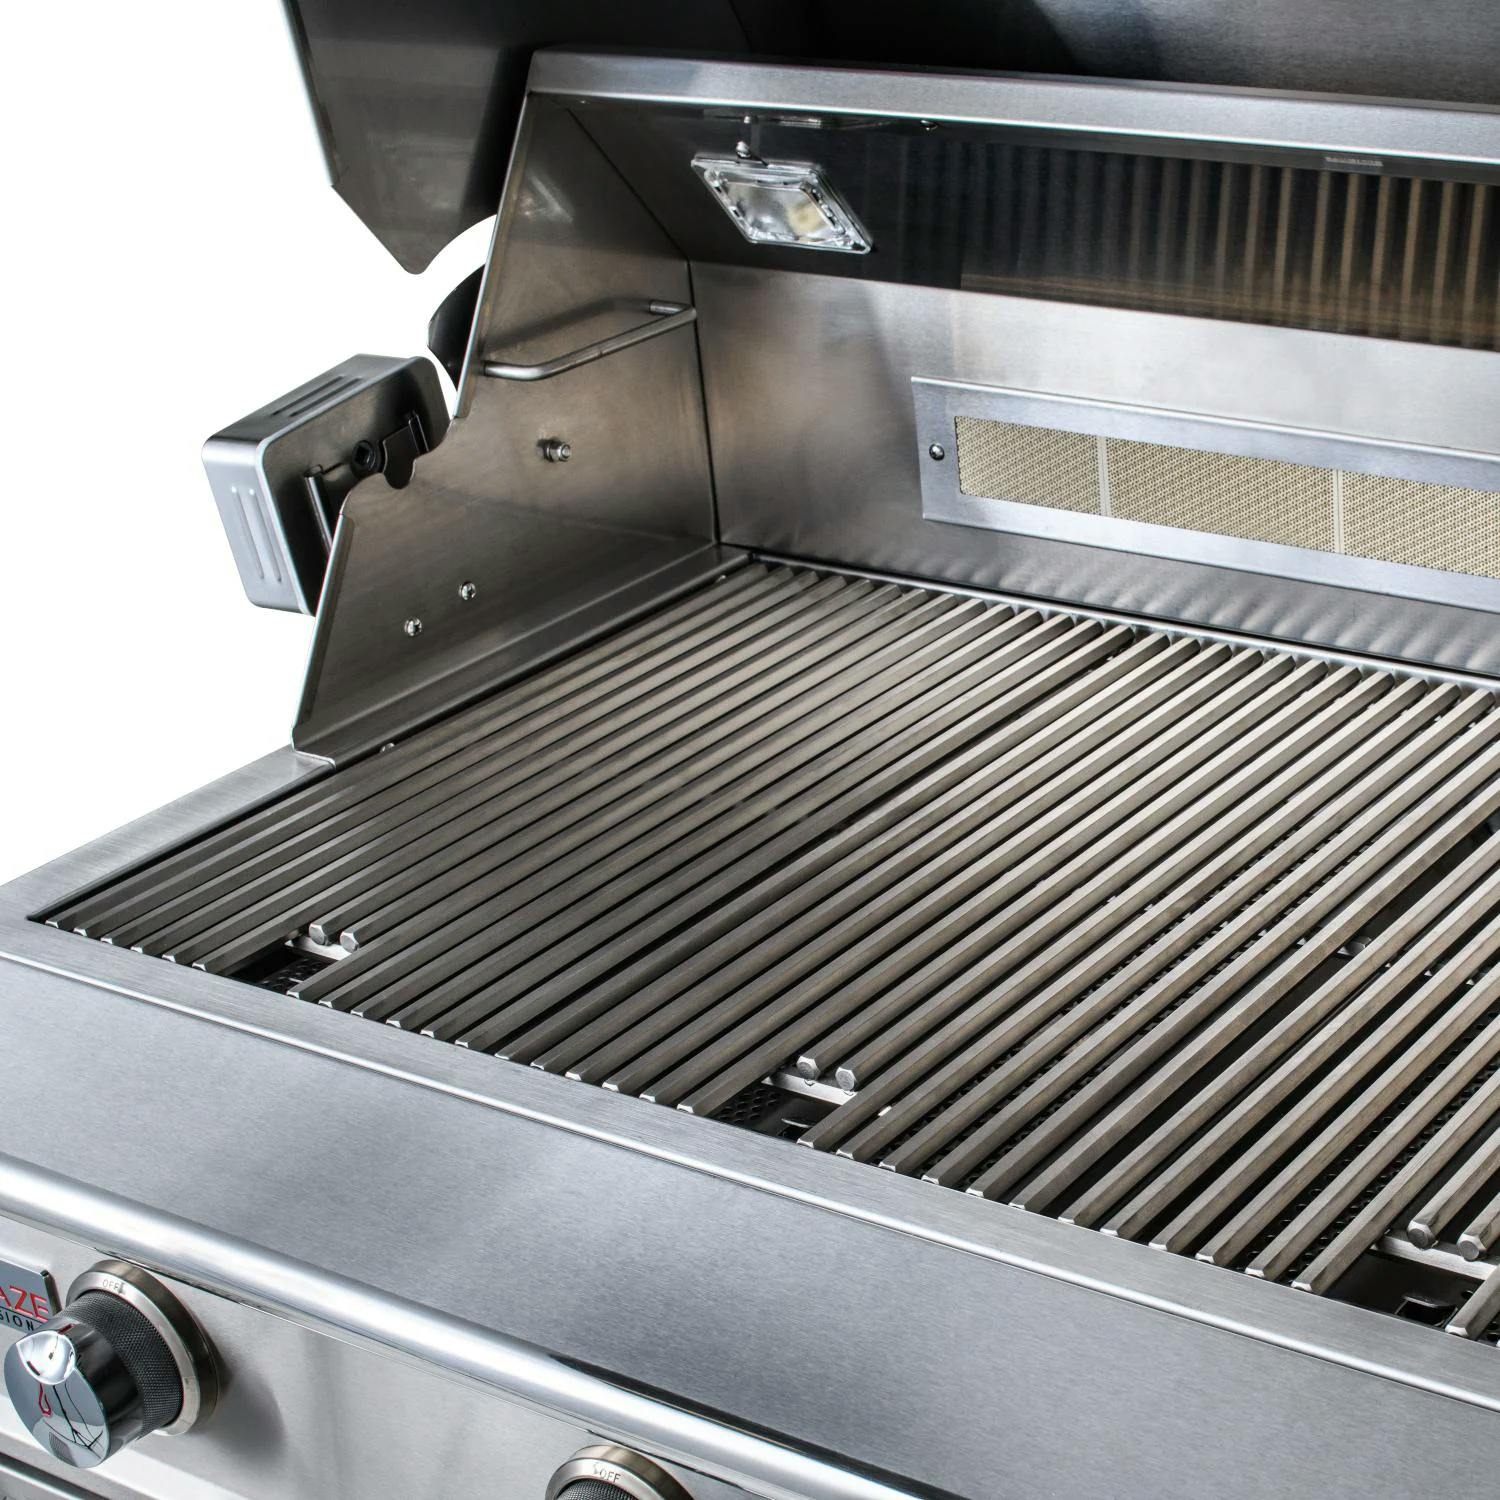 Blaze Professional LUX 3-Burner Built-In Gas Grill with Rear Infrared Burner · 34 in. · Propane